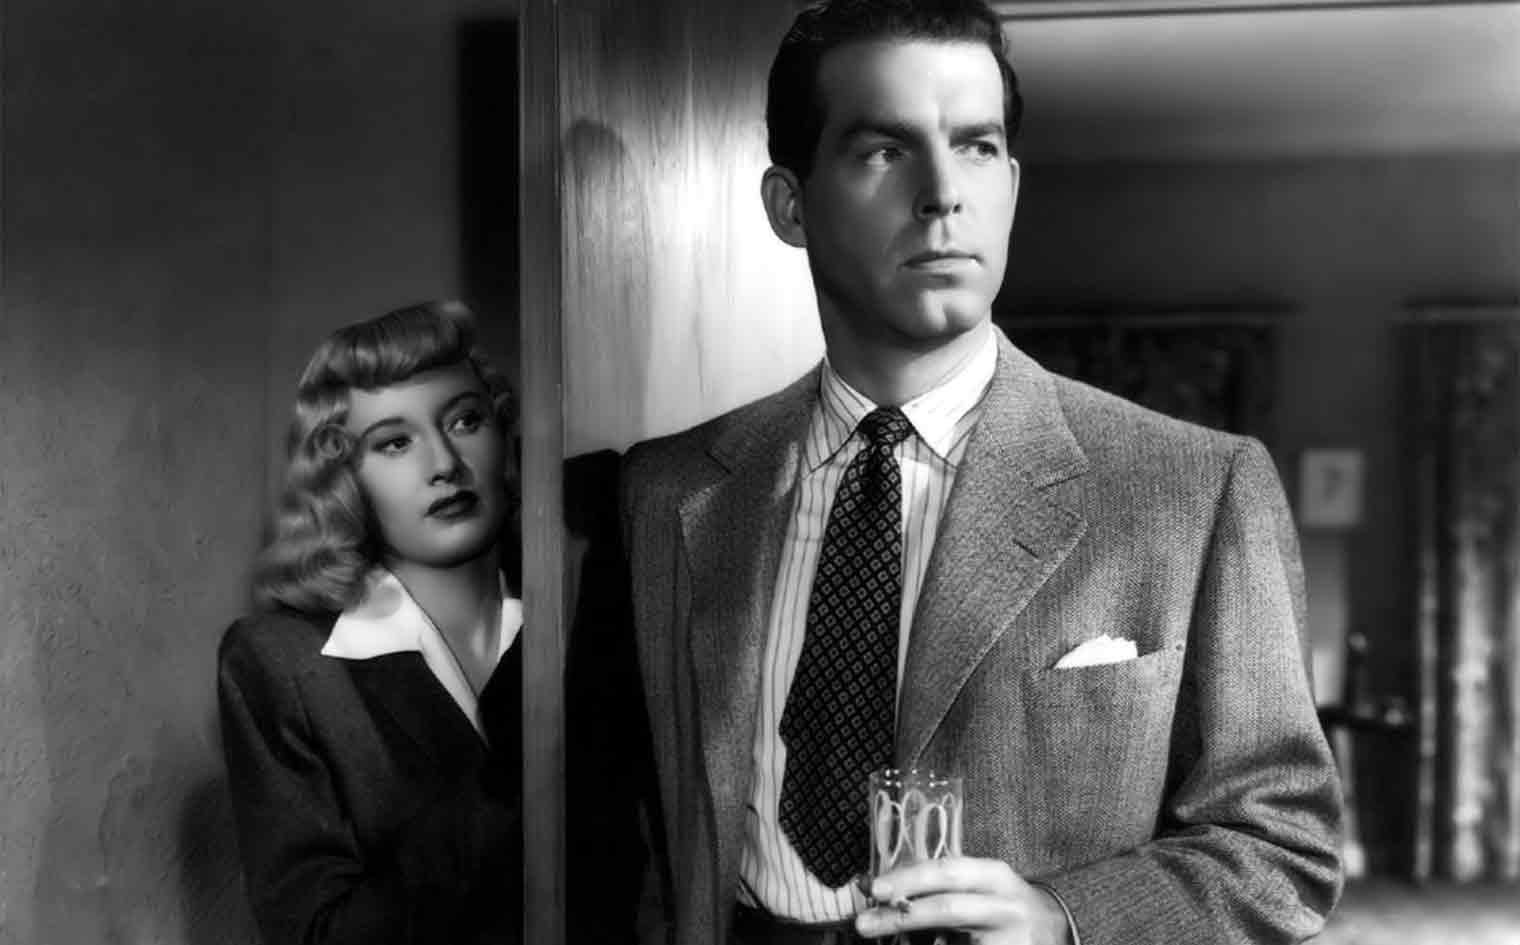 Phyllis Dietrichson (Barbara Stanwyck) and Walter Neff (Fred MacMurray) in Wilder's <em>Double Indemnity</em> (1943).